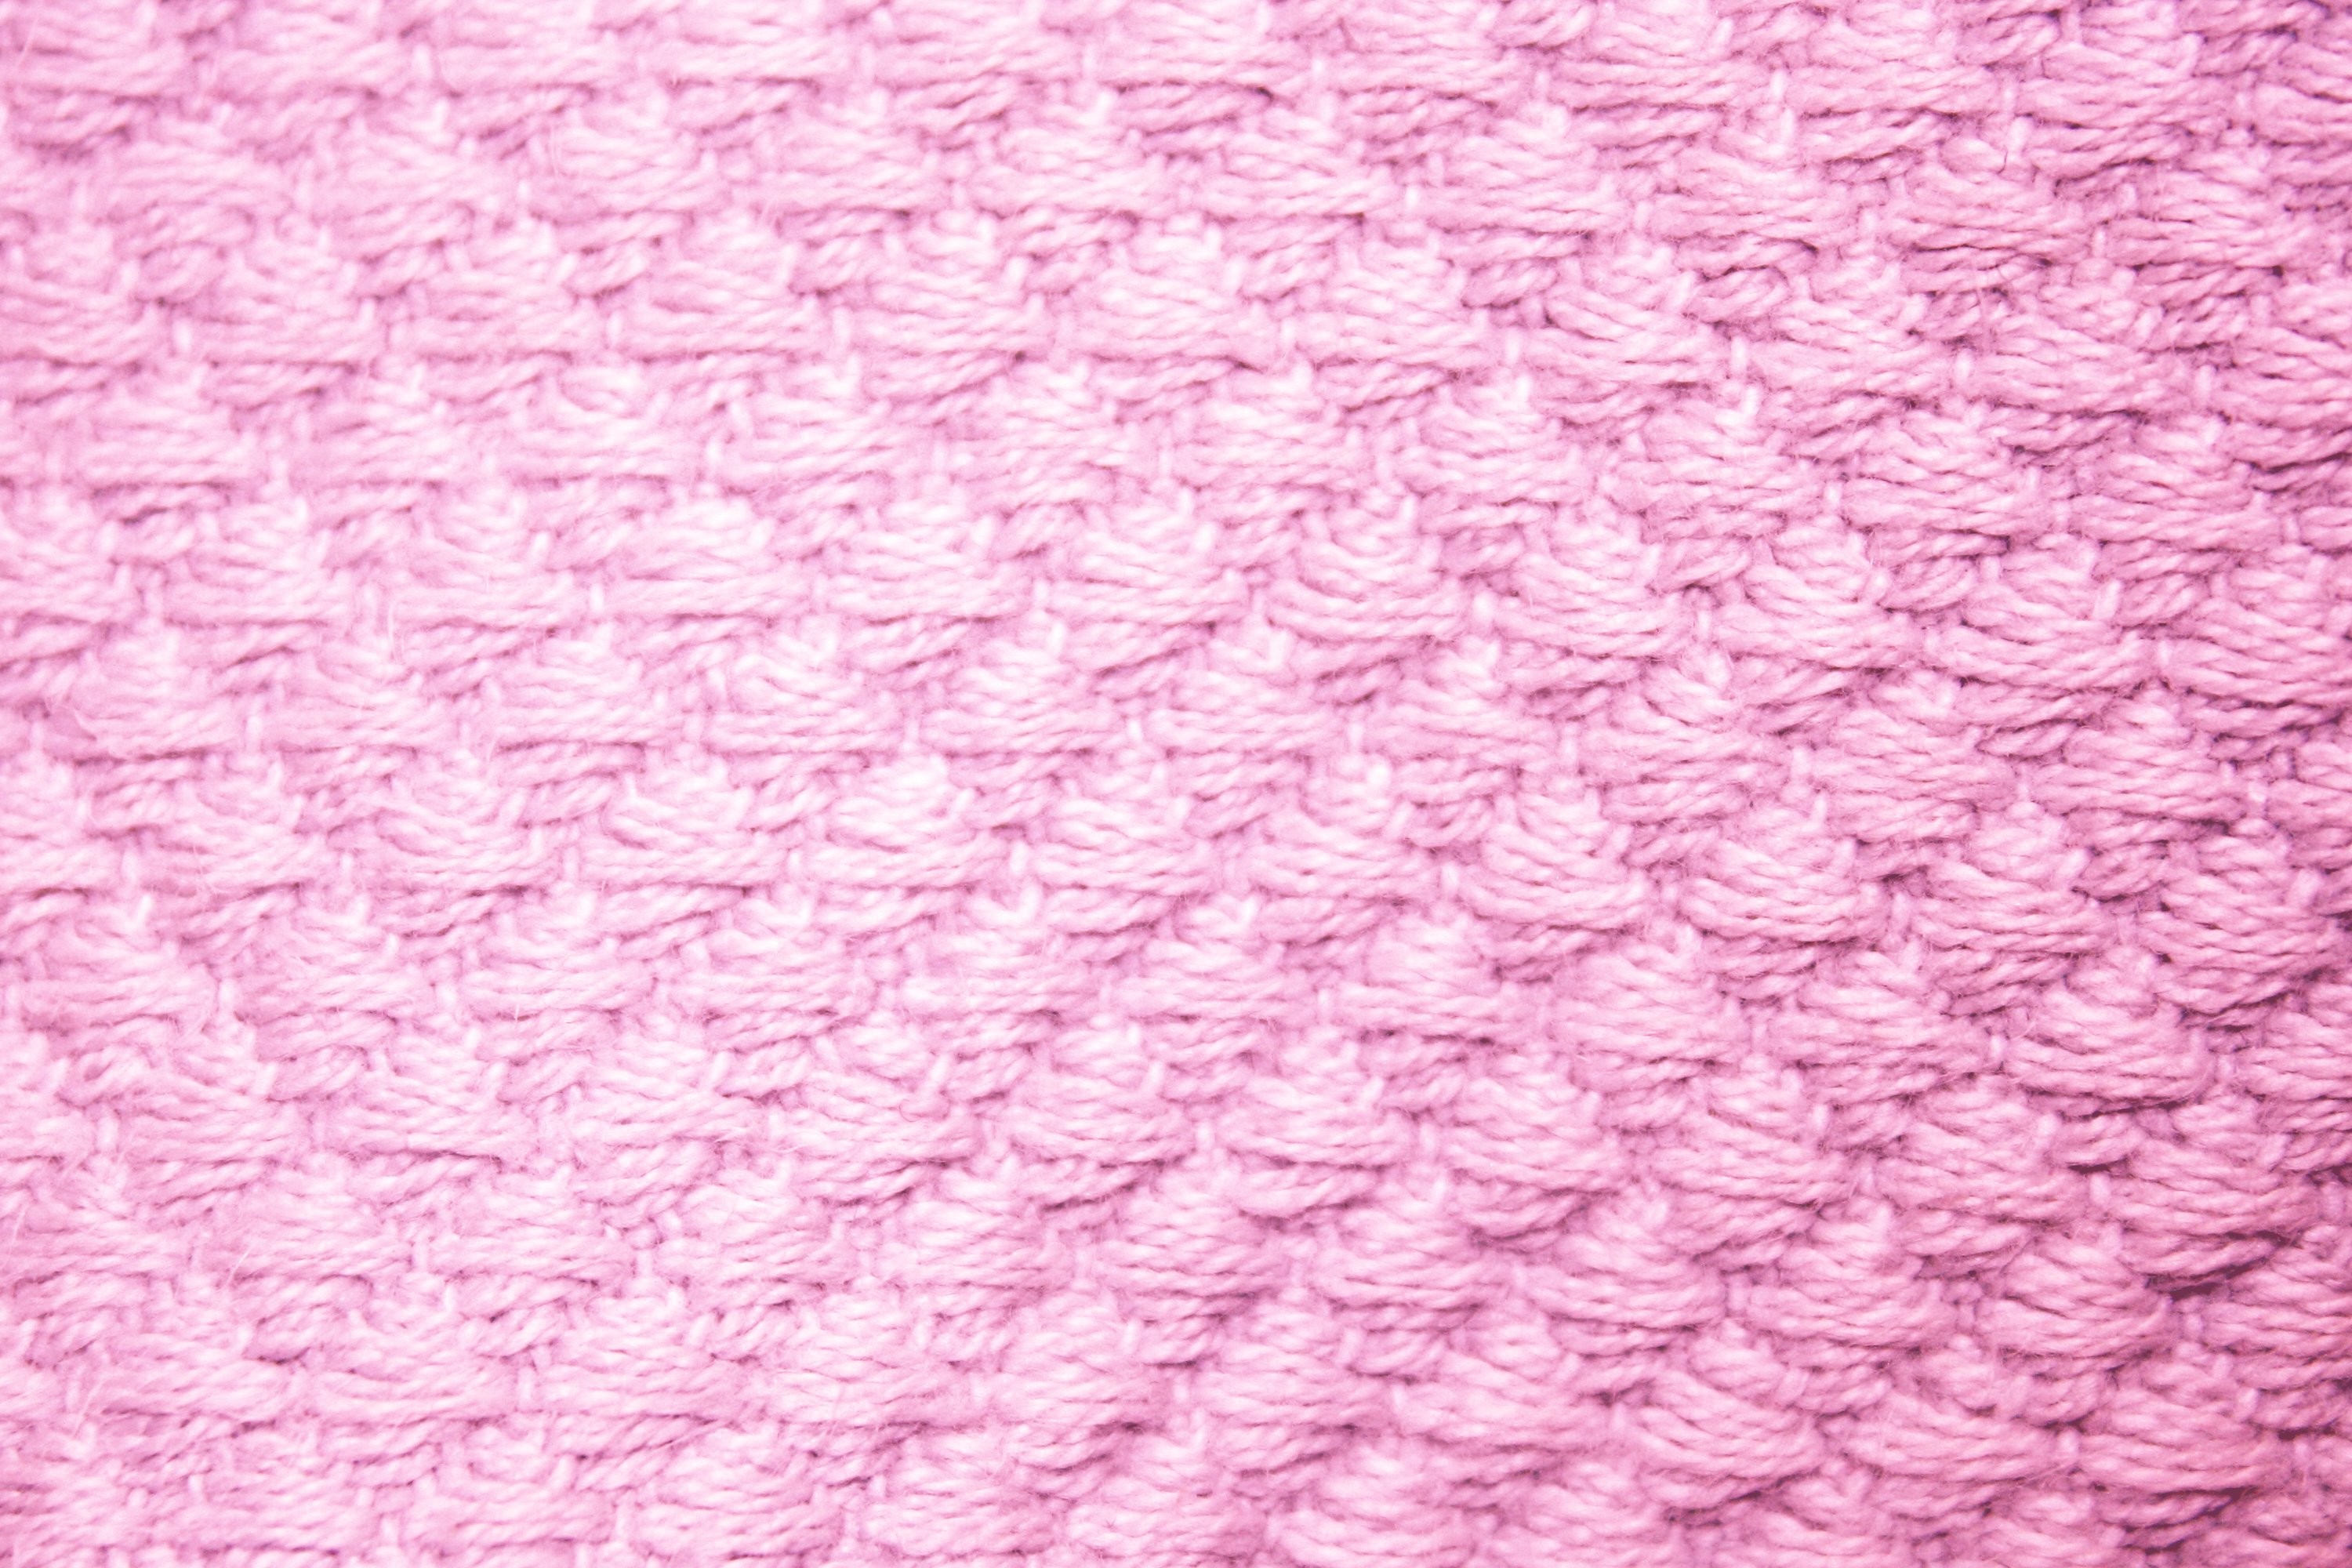 3000x2000 Pink Diamond Patterned Blanket Close Up Texture